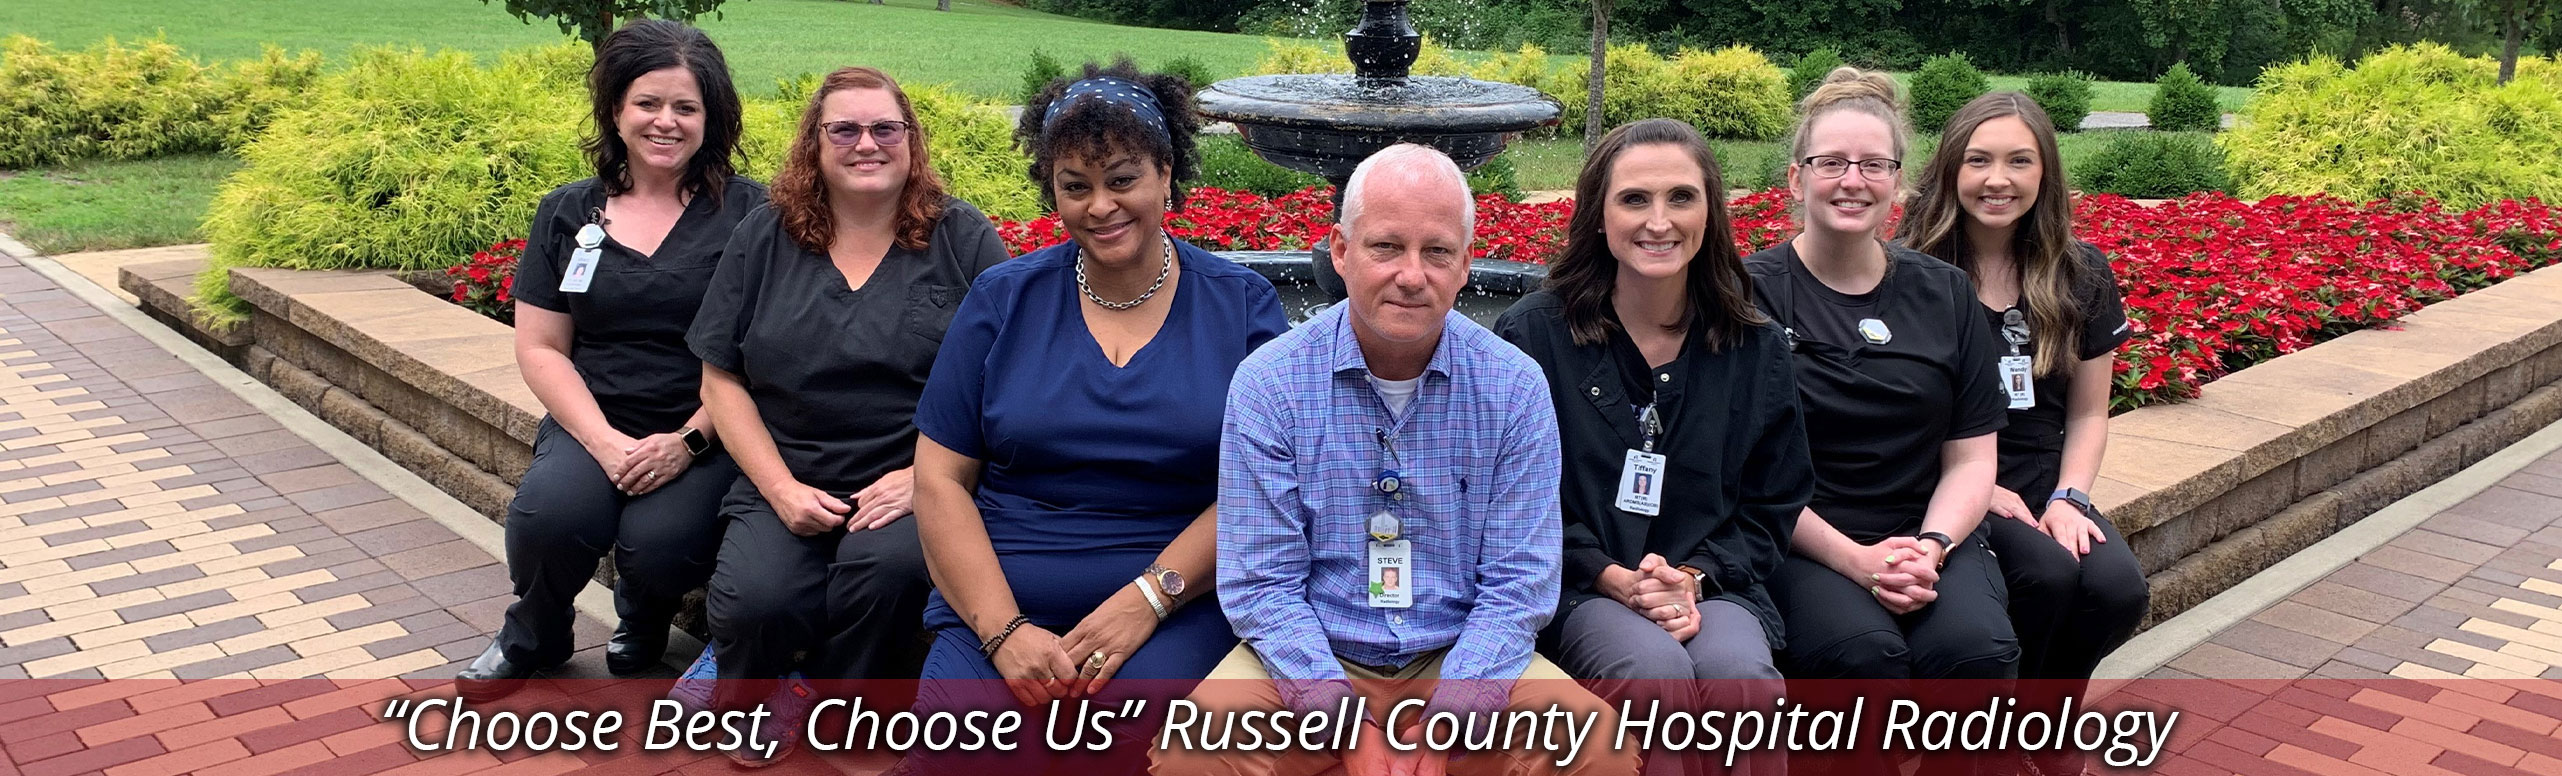 "Choose Best, Choose Us" Russell County Hospital Radiology